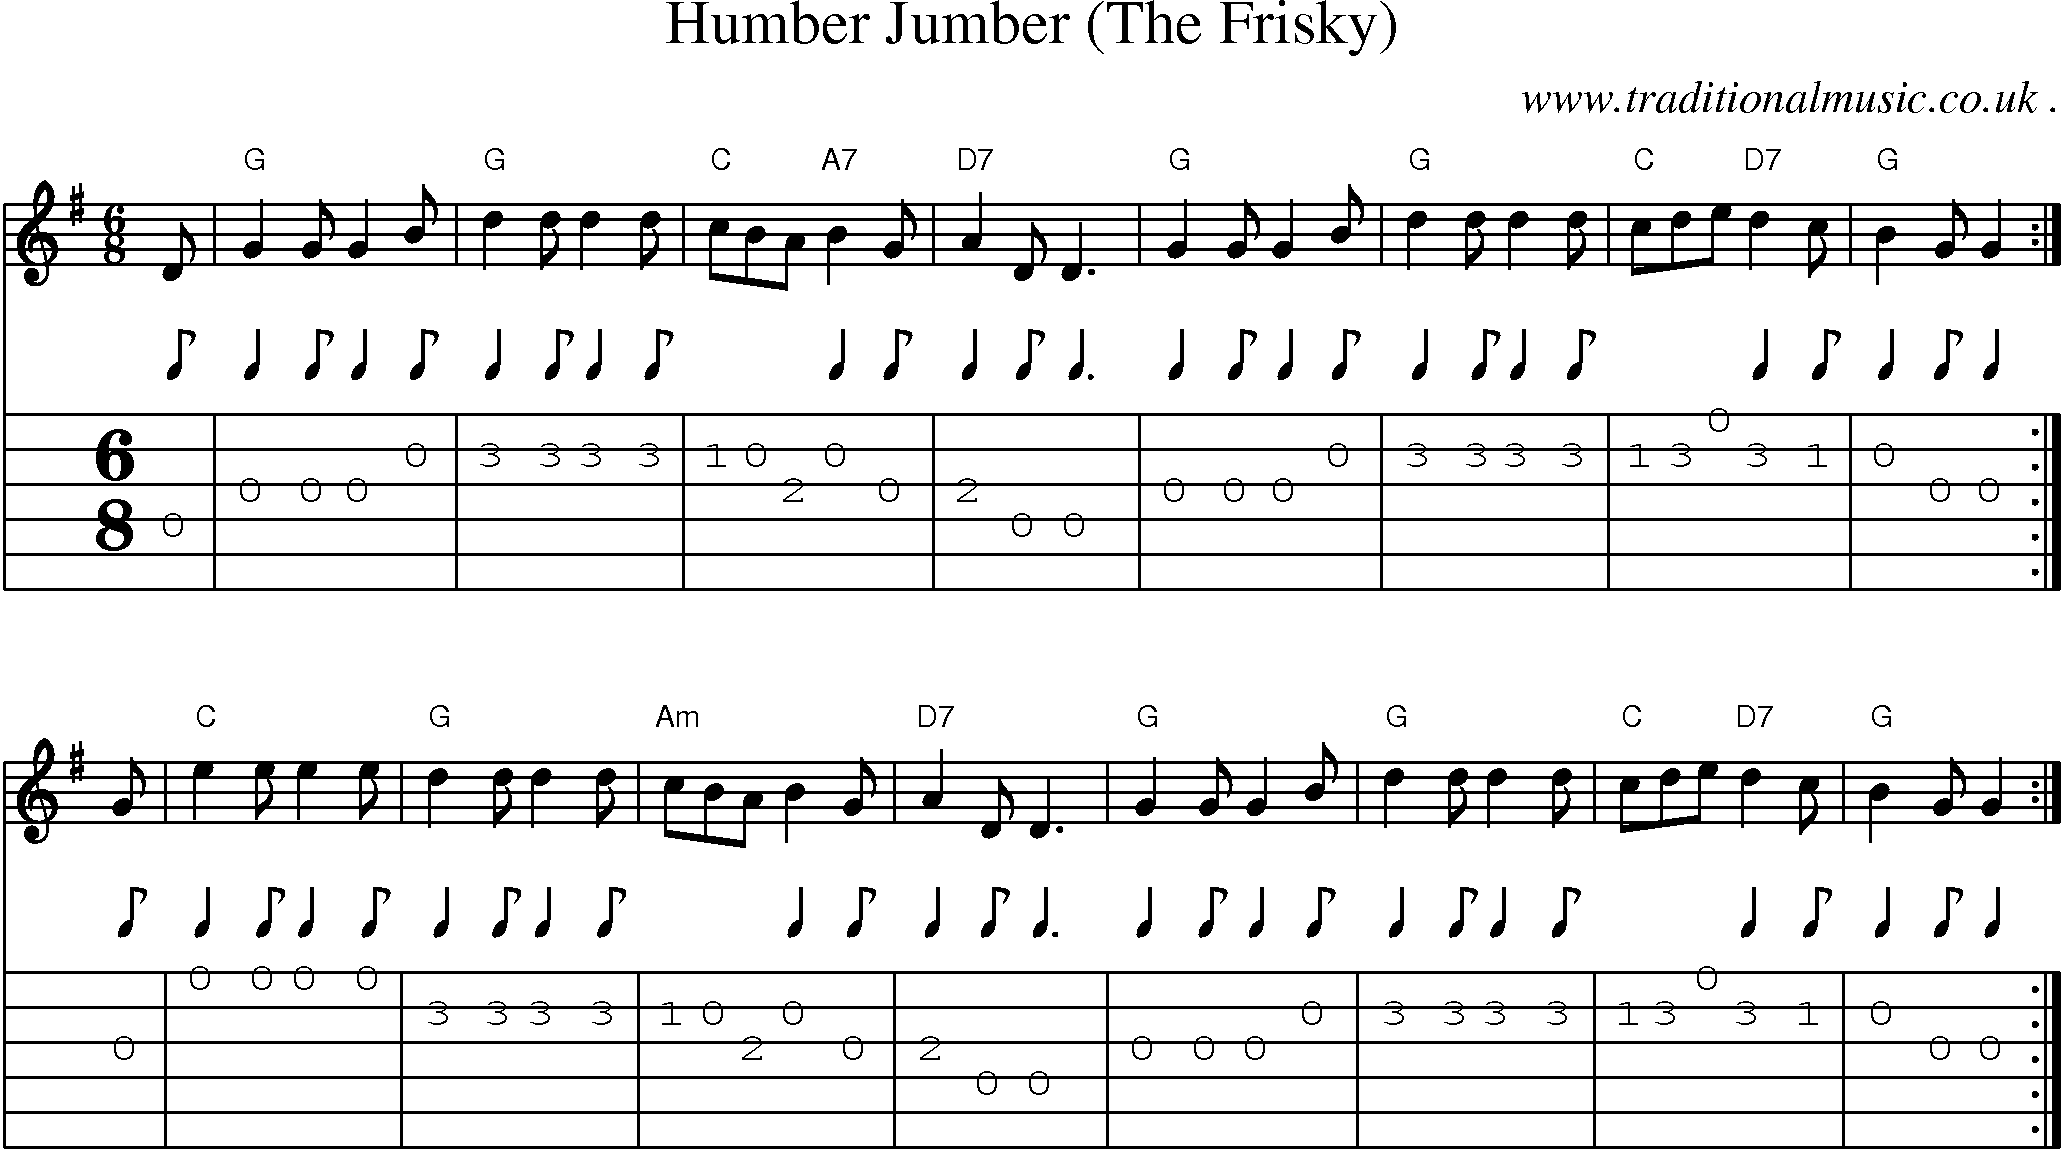 Sheet-Music and Guitar Tabs for Humber Jumber (the Frisky)